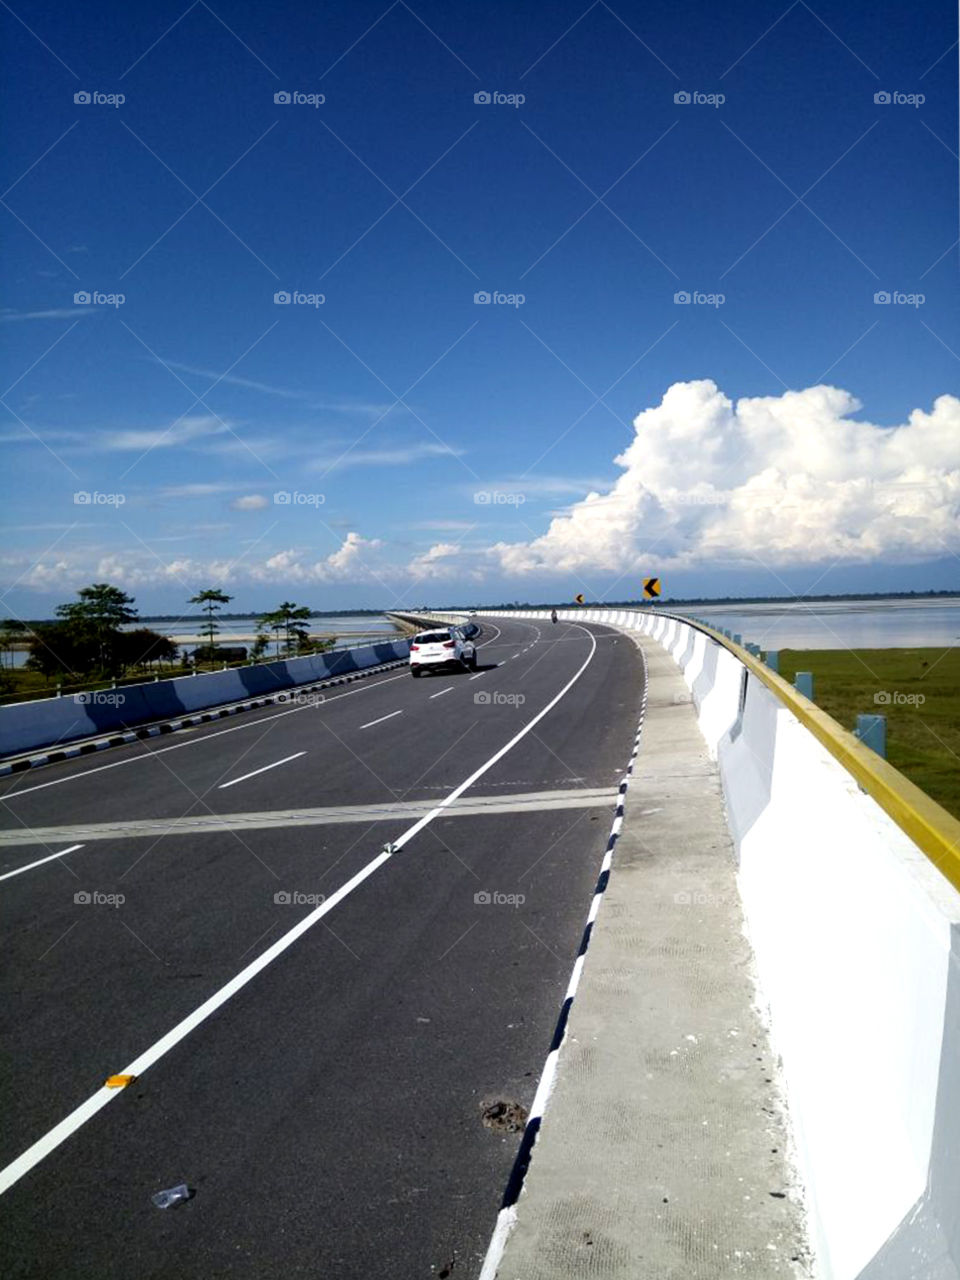 Dhola Brige . This brige is have in Assam. I taked  the photo when i went to visit to see that Brige.